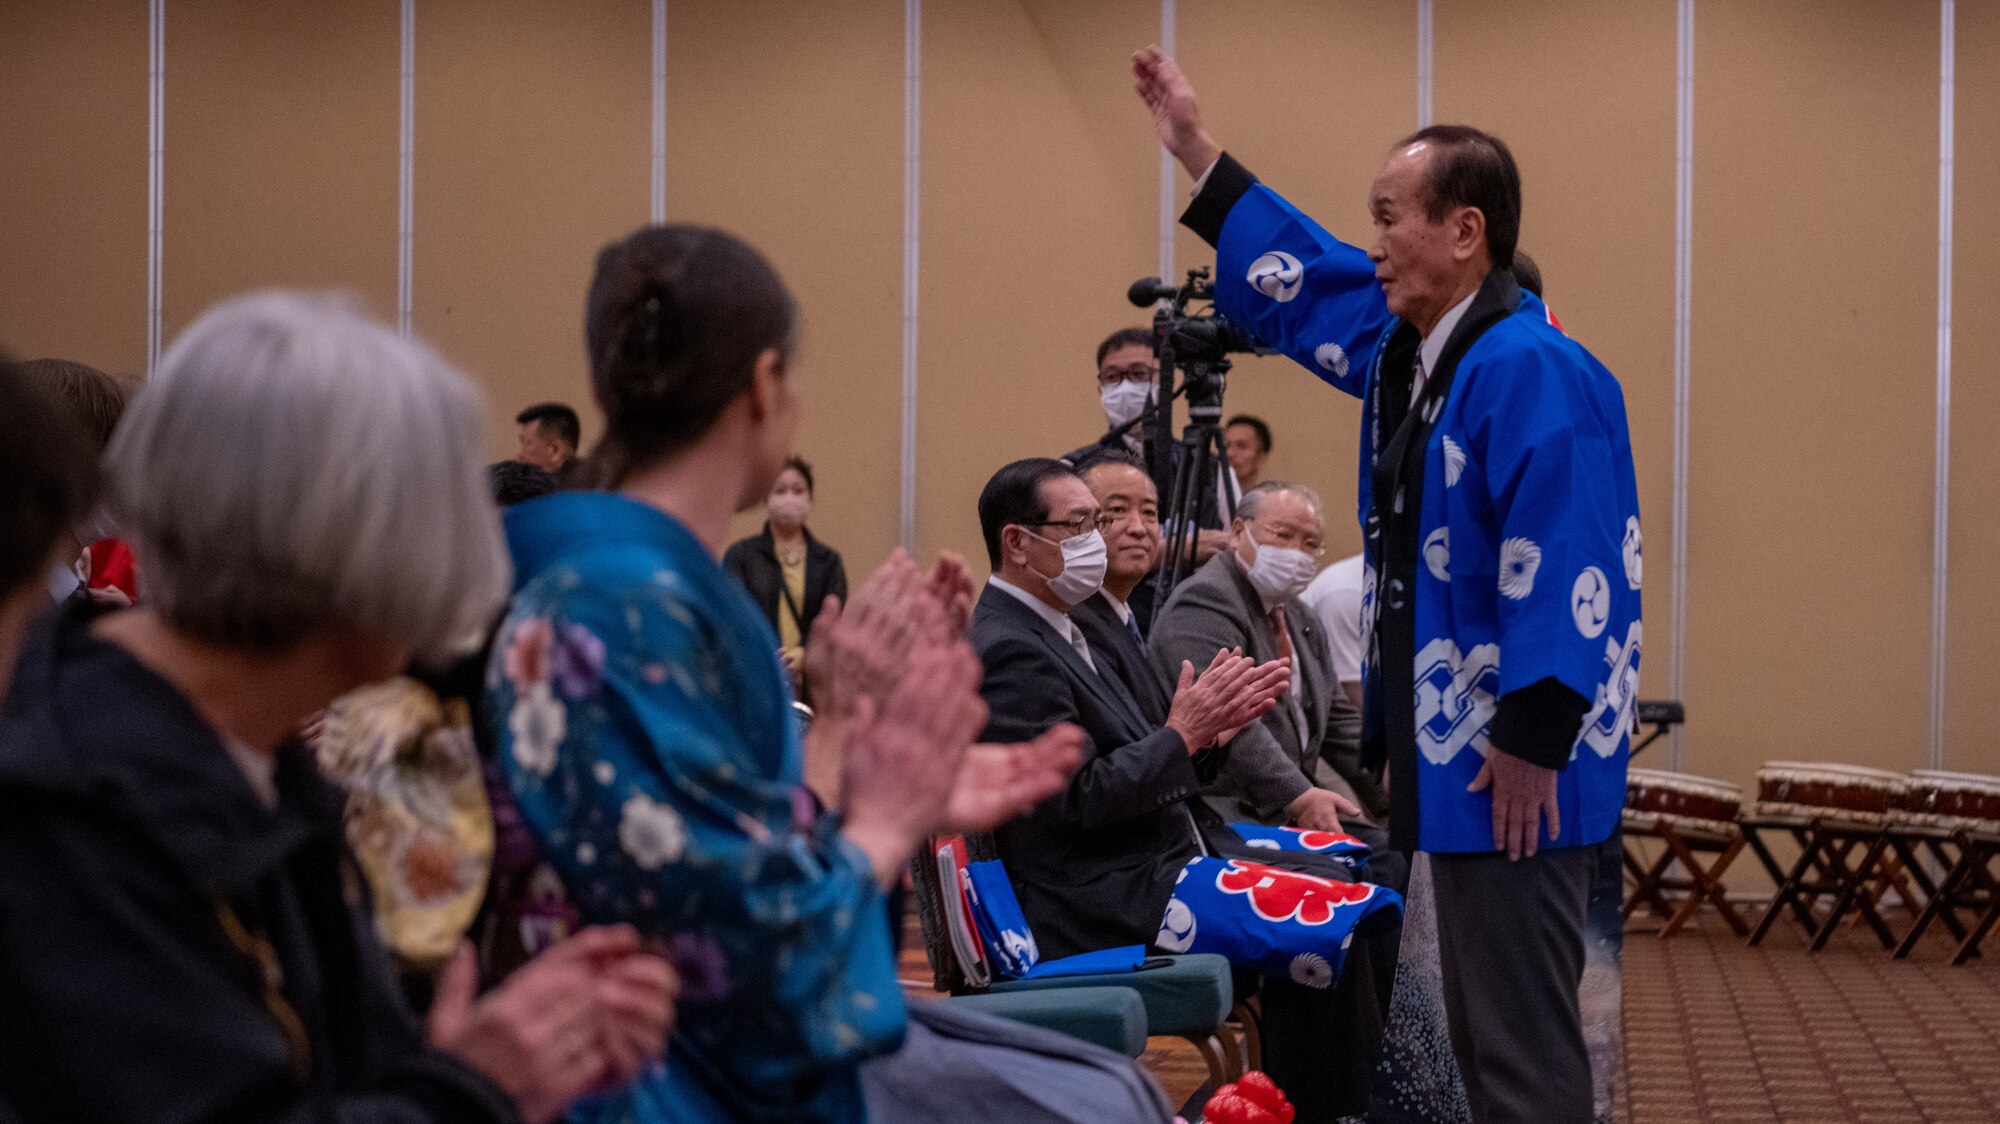 Japan Day is an event where Japanese culture and its traditions are introduced to Misawa Air Base service members and their families, offering the opportunity to be immersed into an event that hosted hands-on booths, dance performances, Japanese horseback archery and calligraphy.